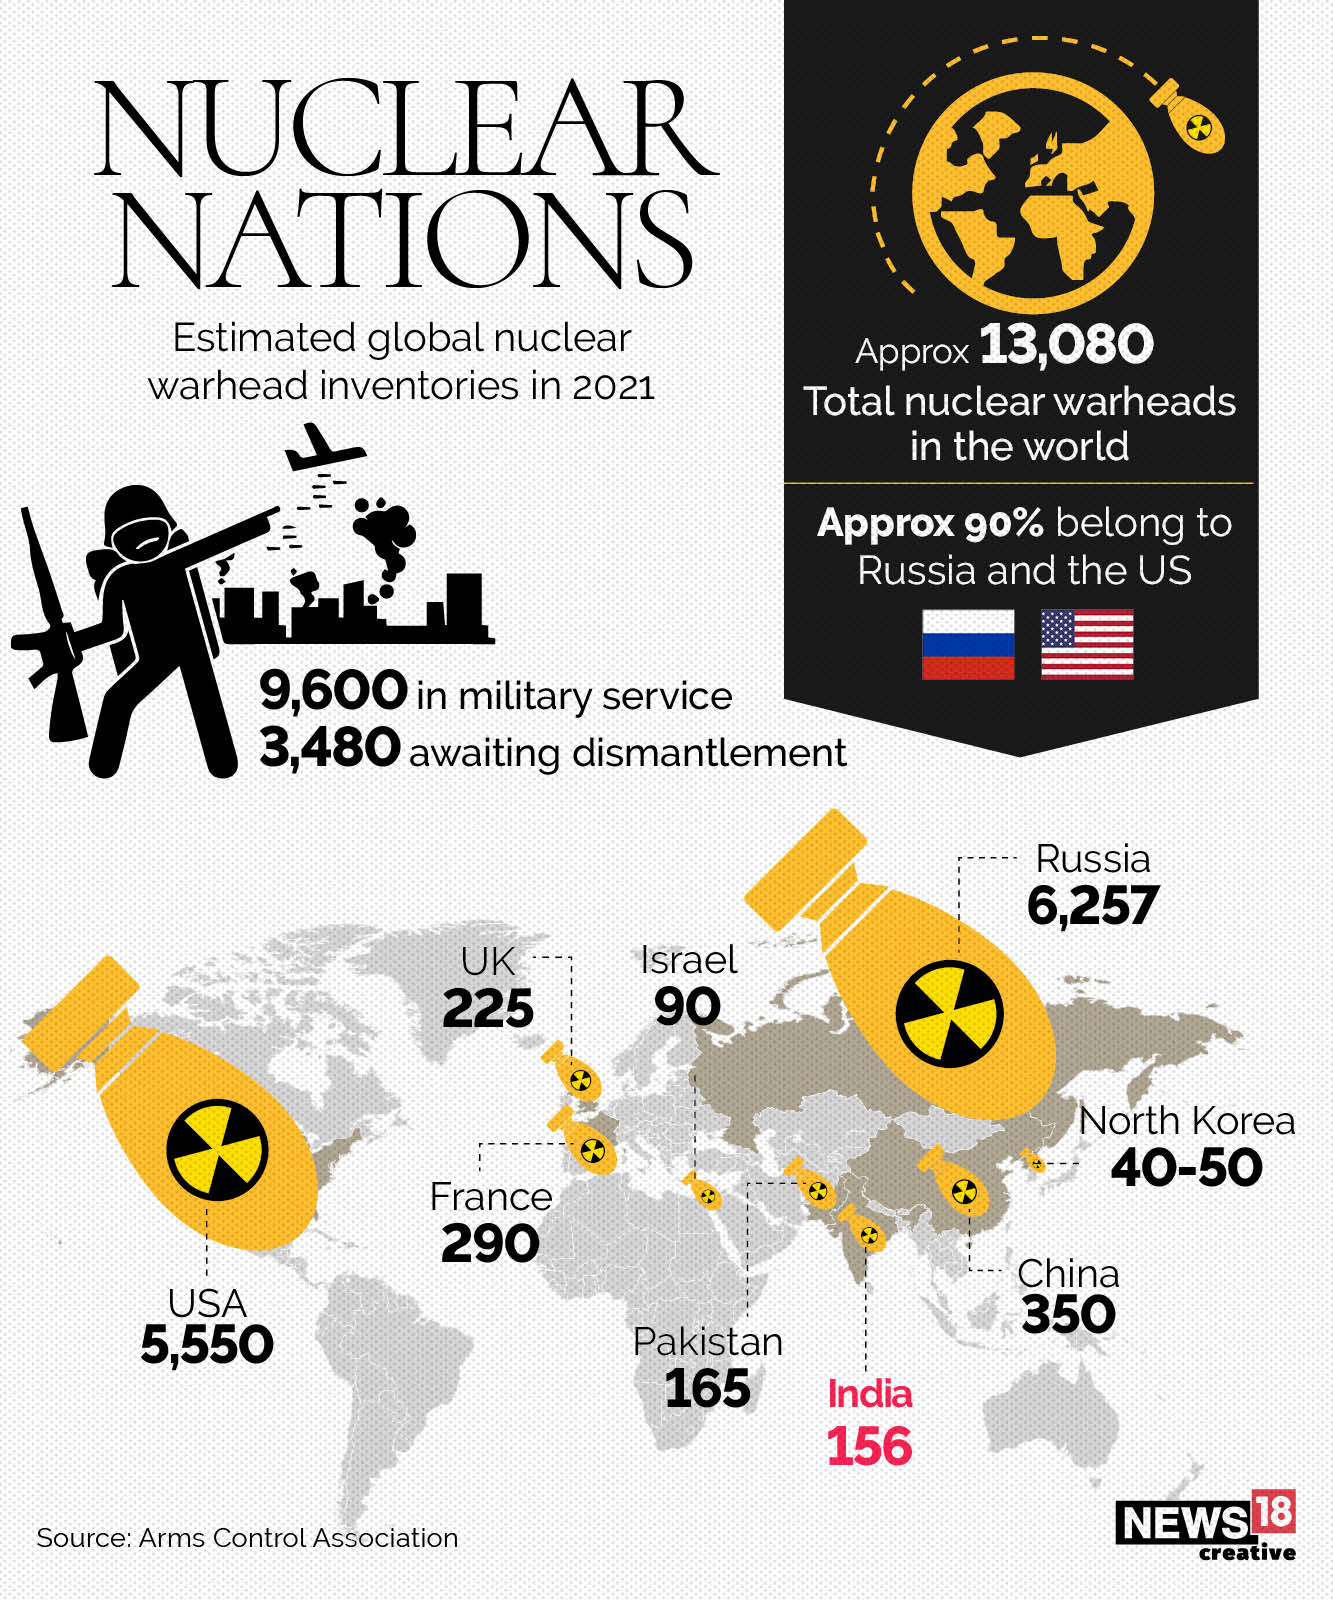 Who owns the most nuclear warheads in the world?